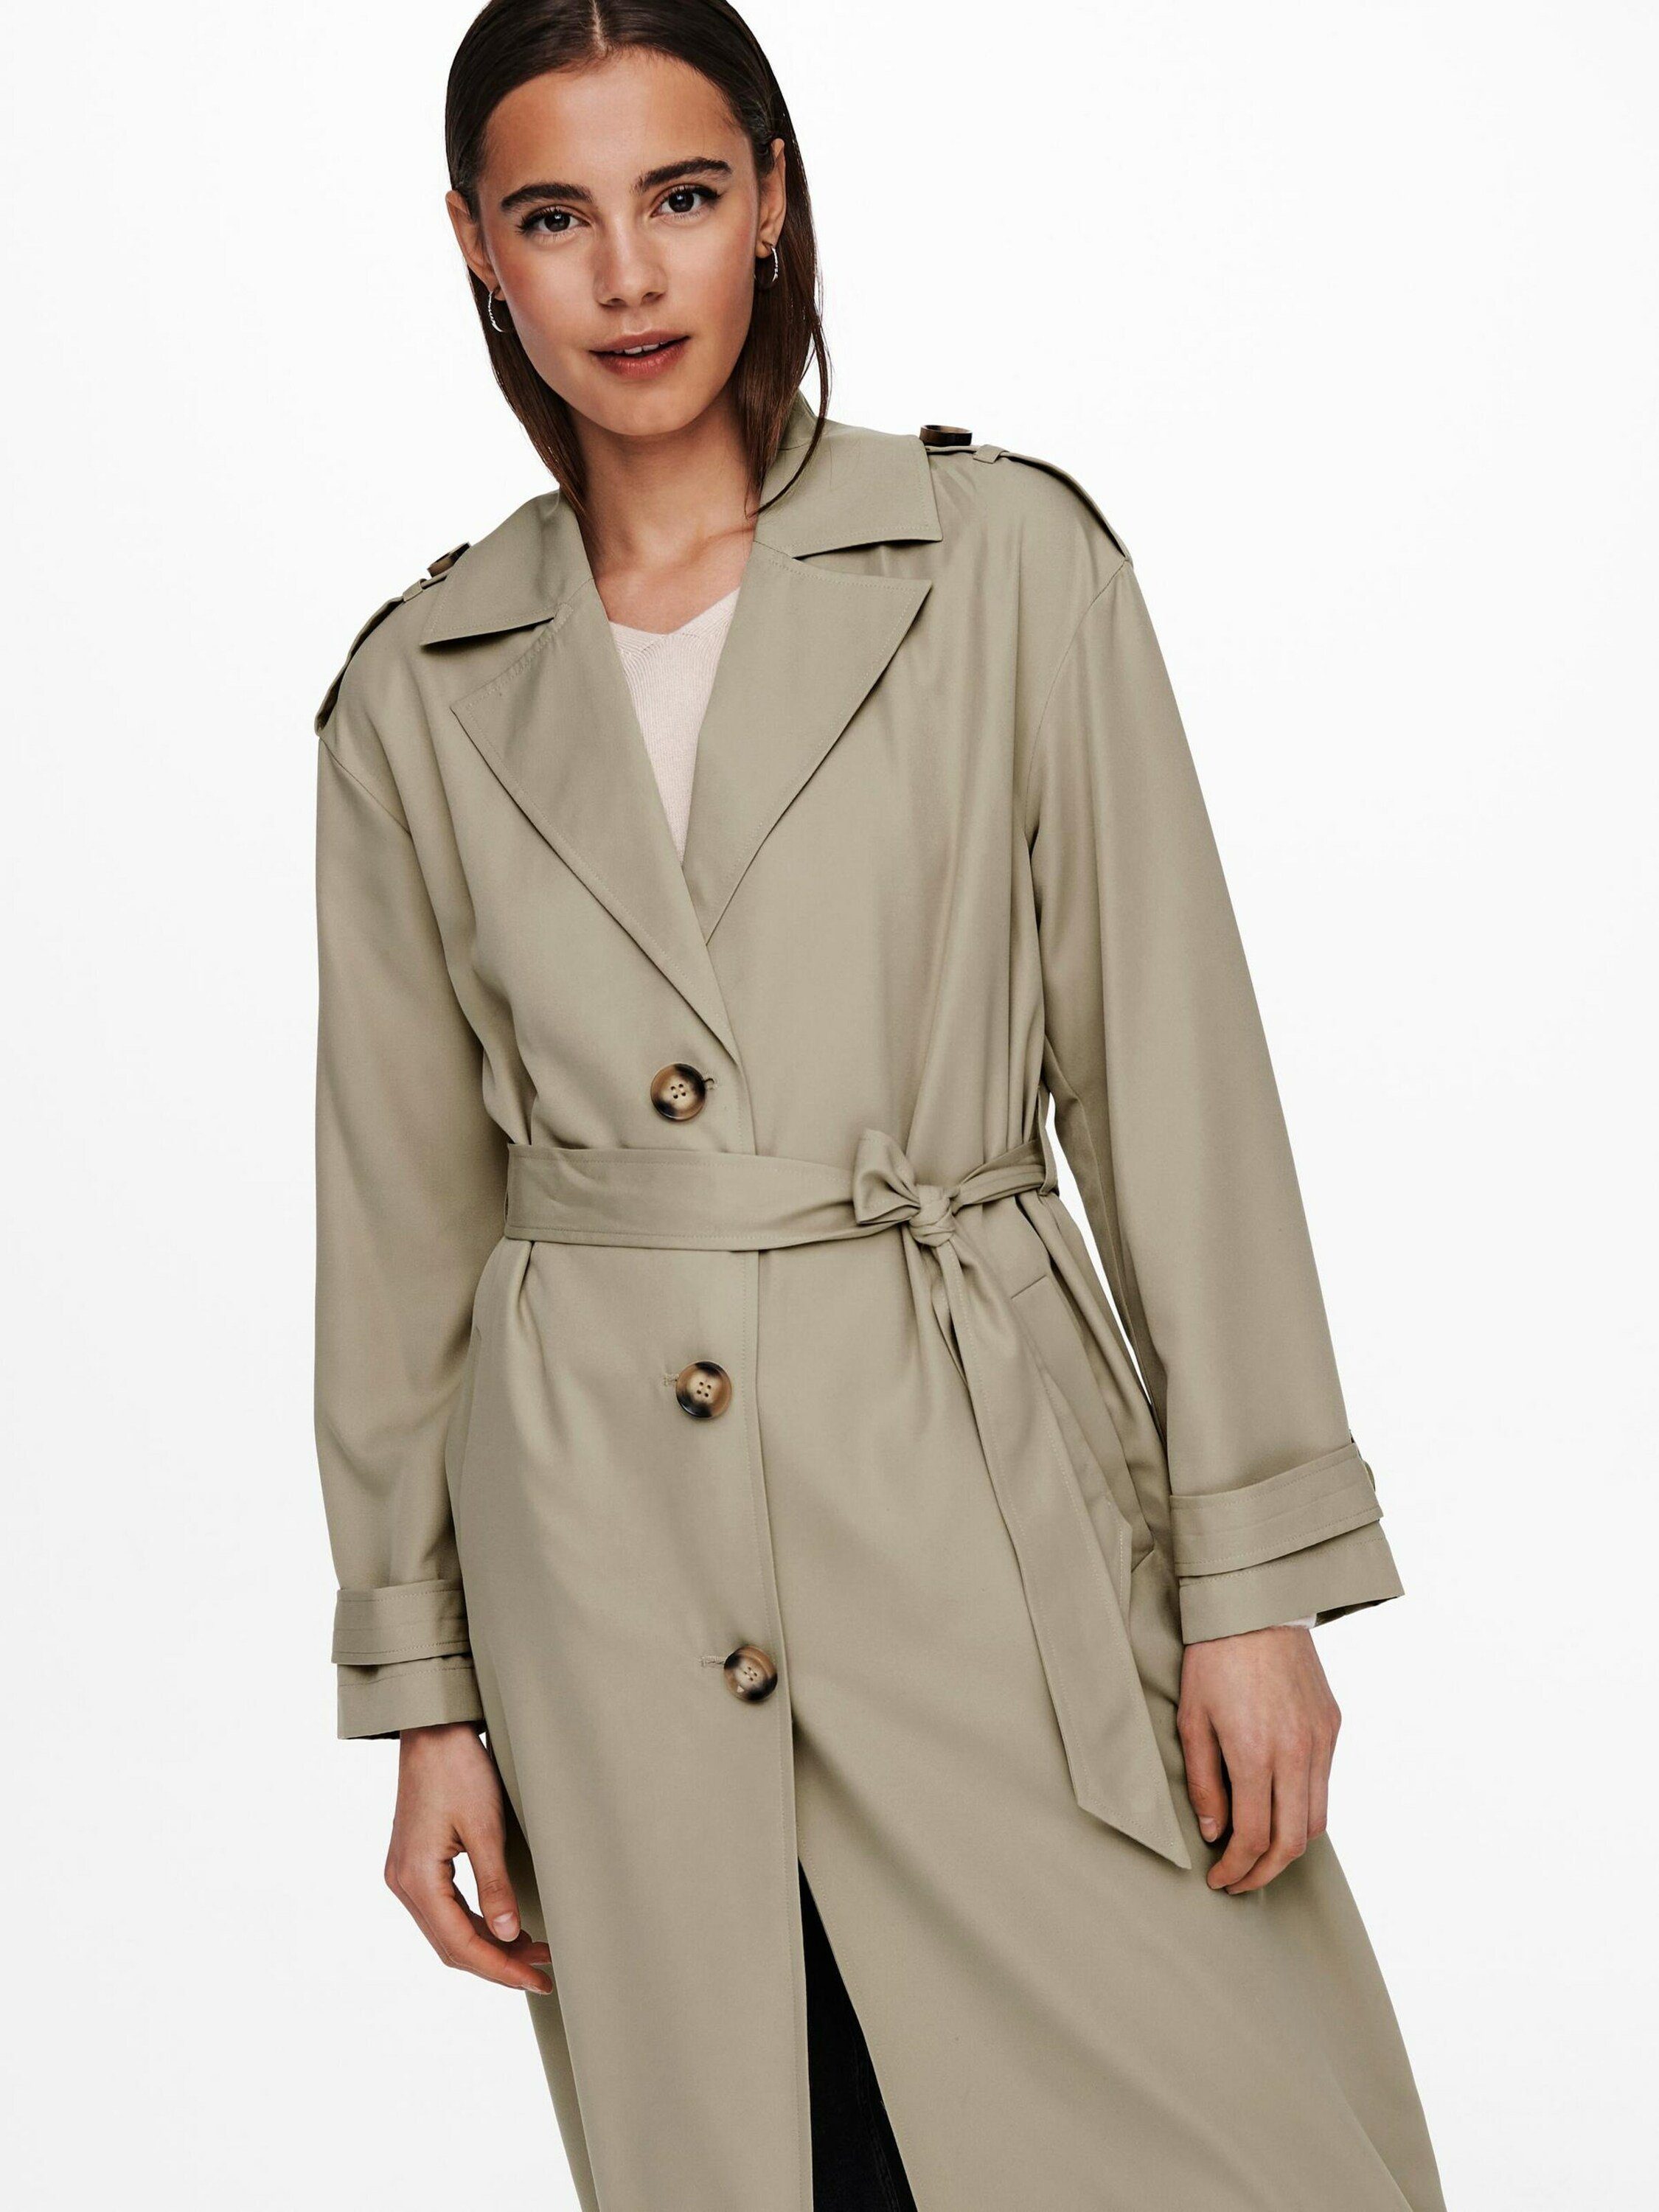 ONLY Line (1-tlg) Trenchcoat